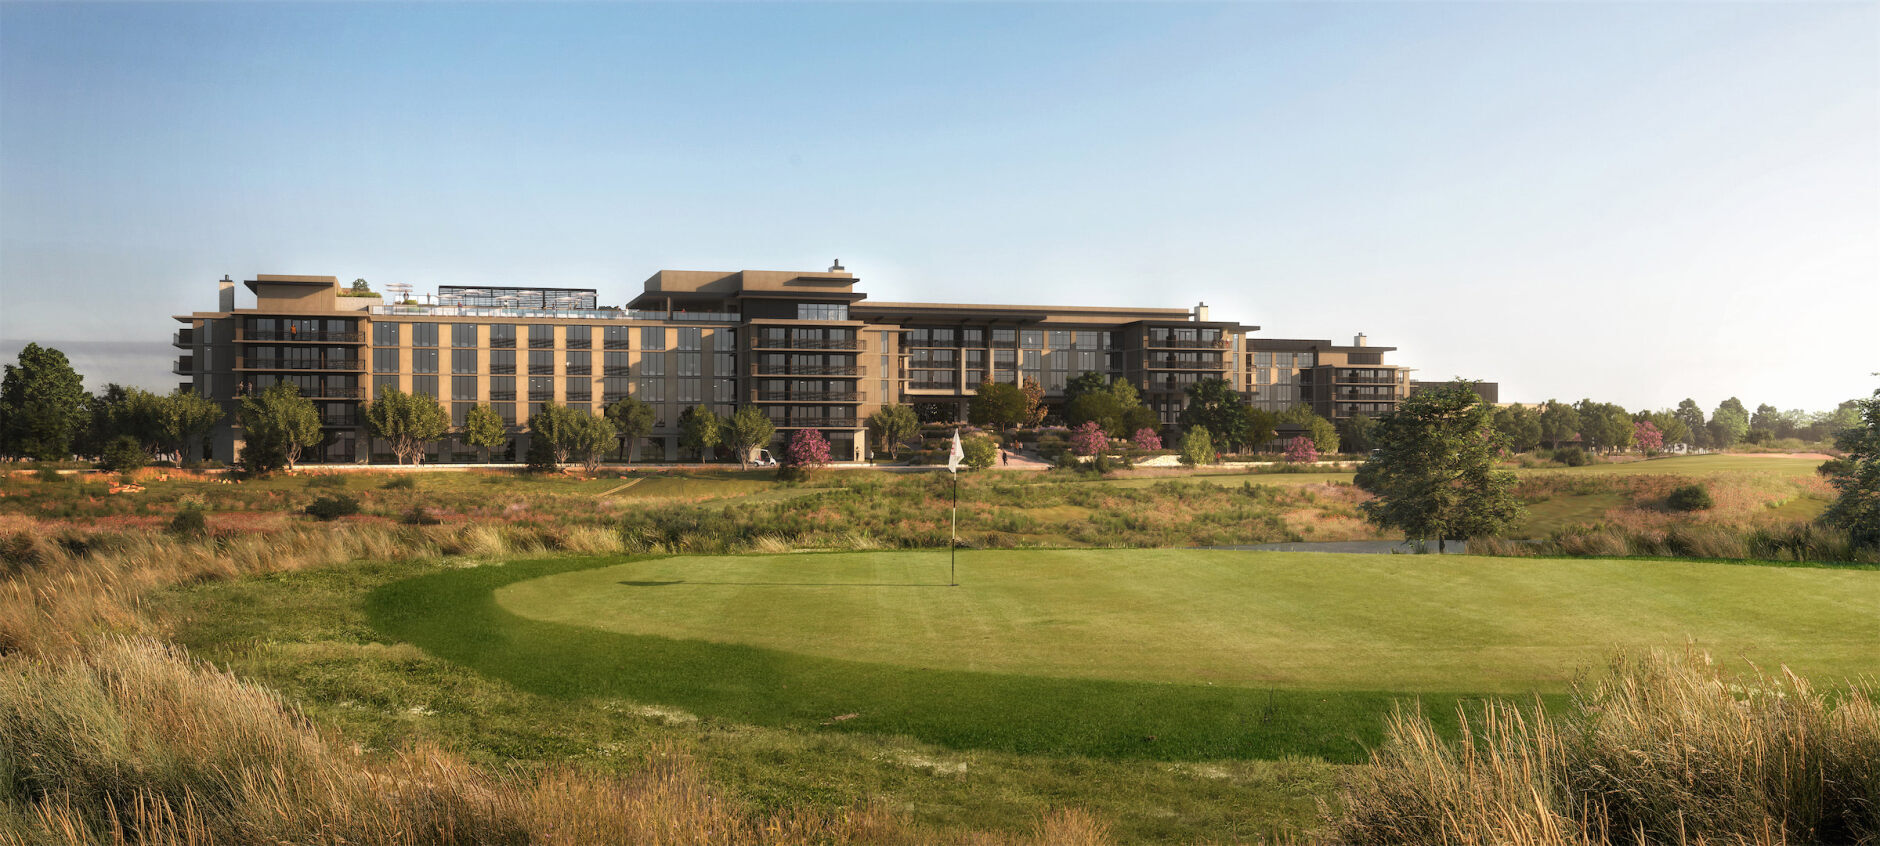 ROH New Hotel Openings: Omni PGA Frisco Hotel and golf course